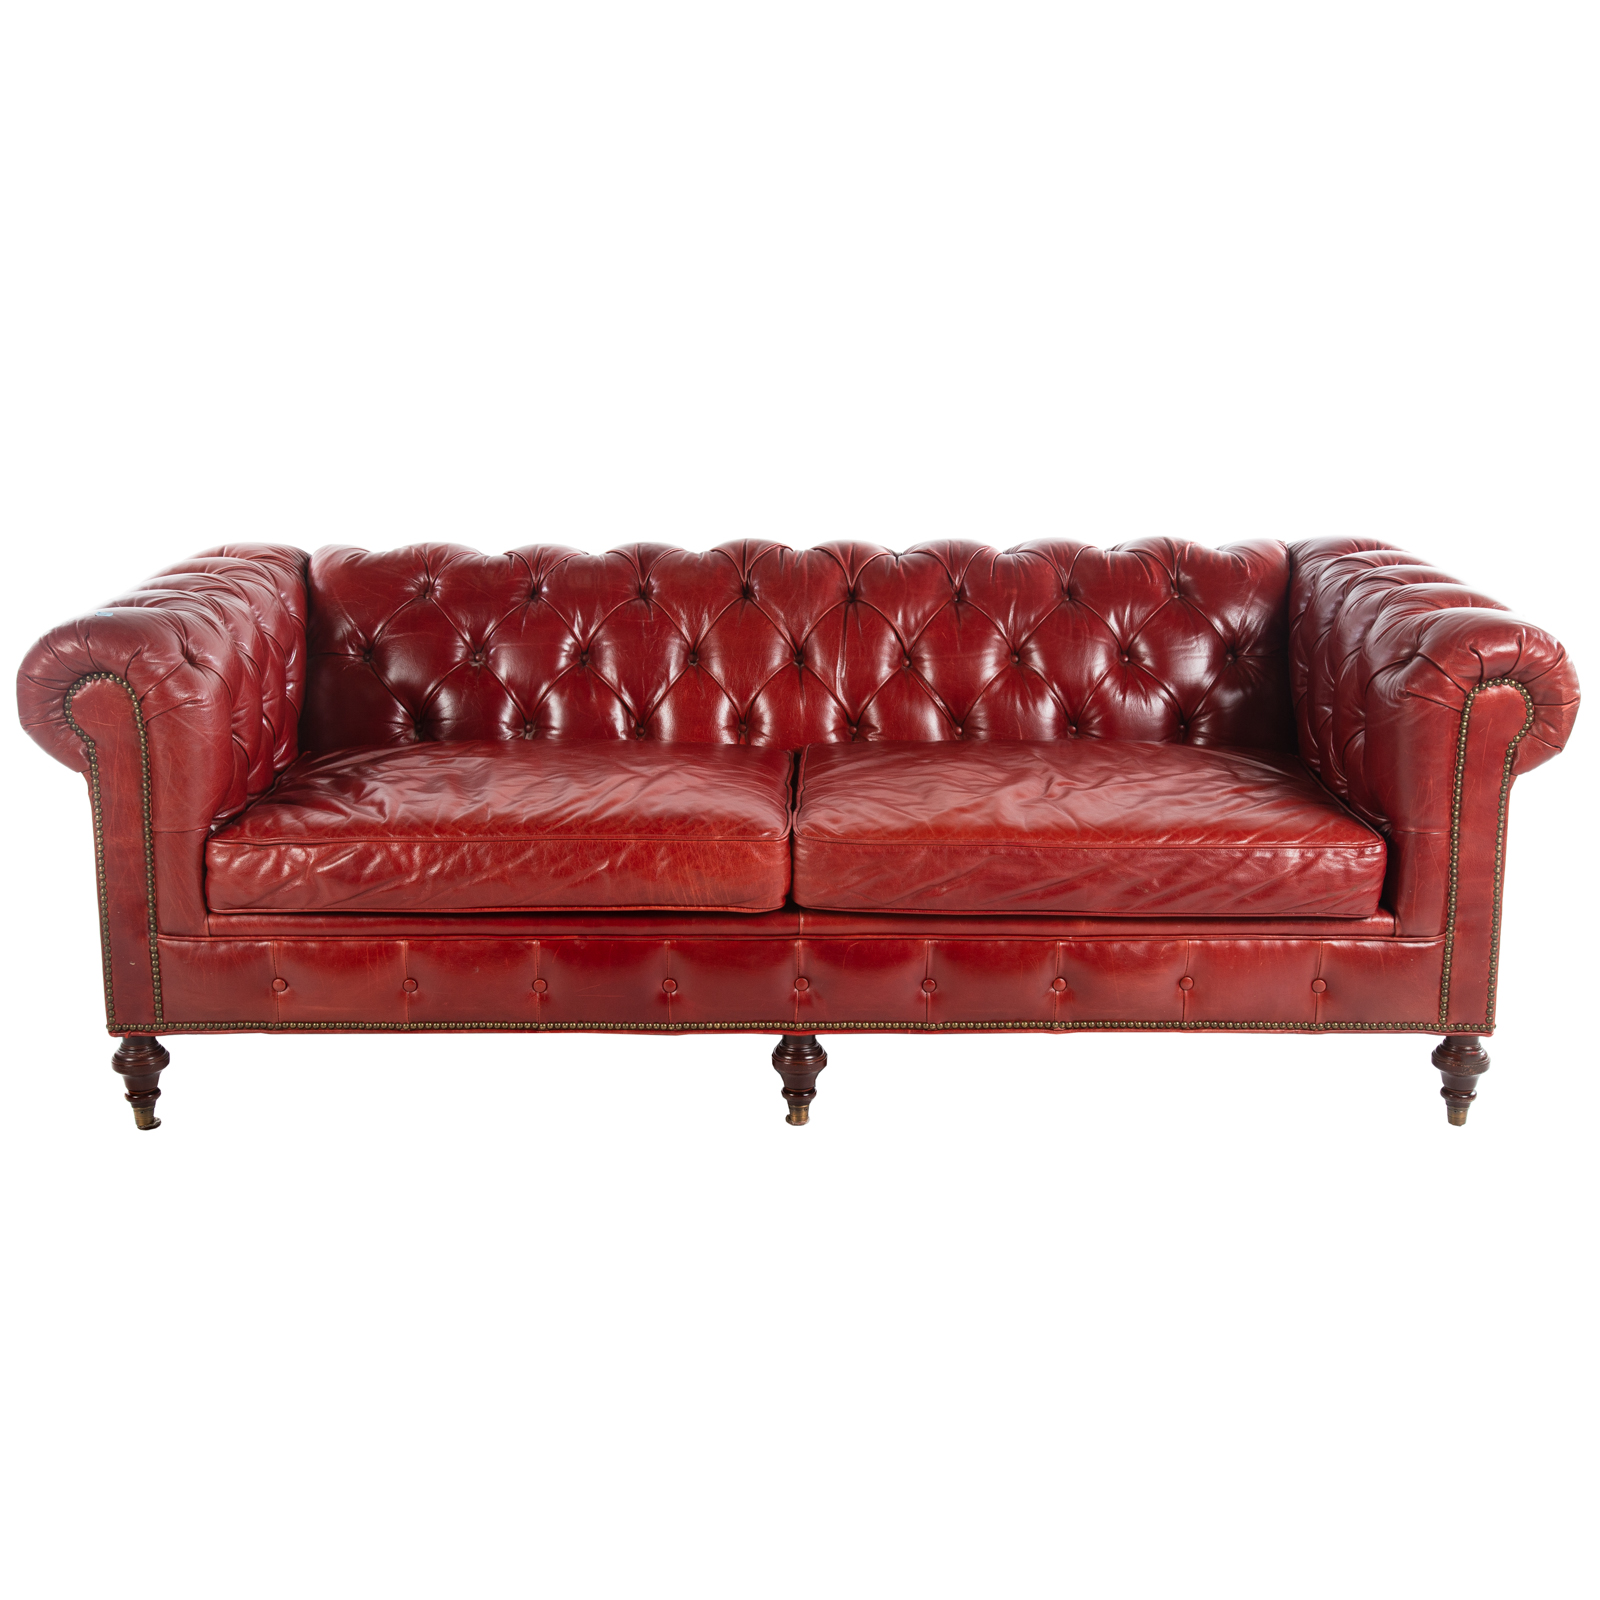 MCKINLEY LEATHER TUFTED CHESTERFIELD 36942f